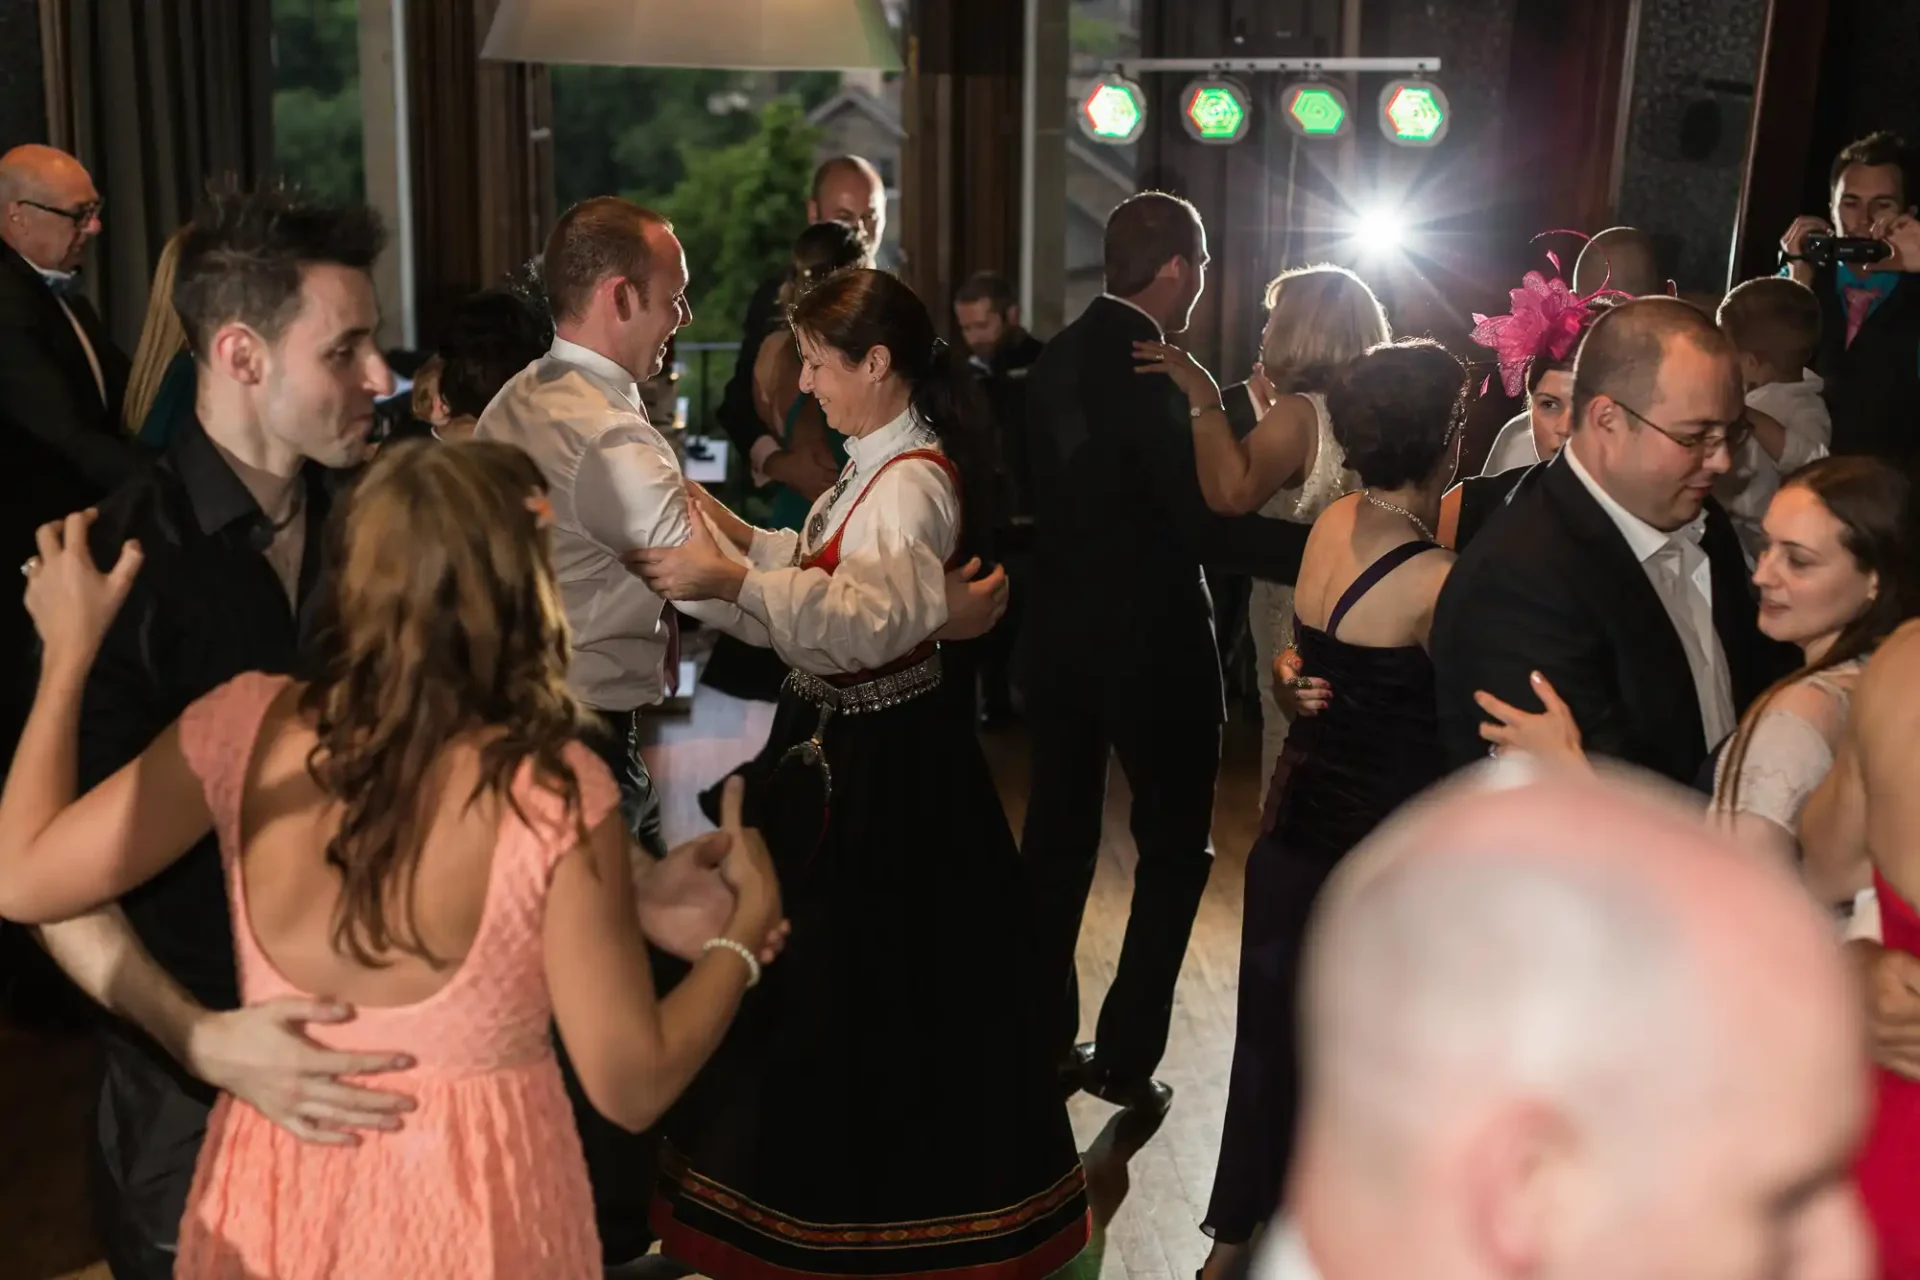 Guests dancing at a wedding reception, some in traditional attire, with colorful lights in the background.